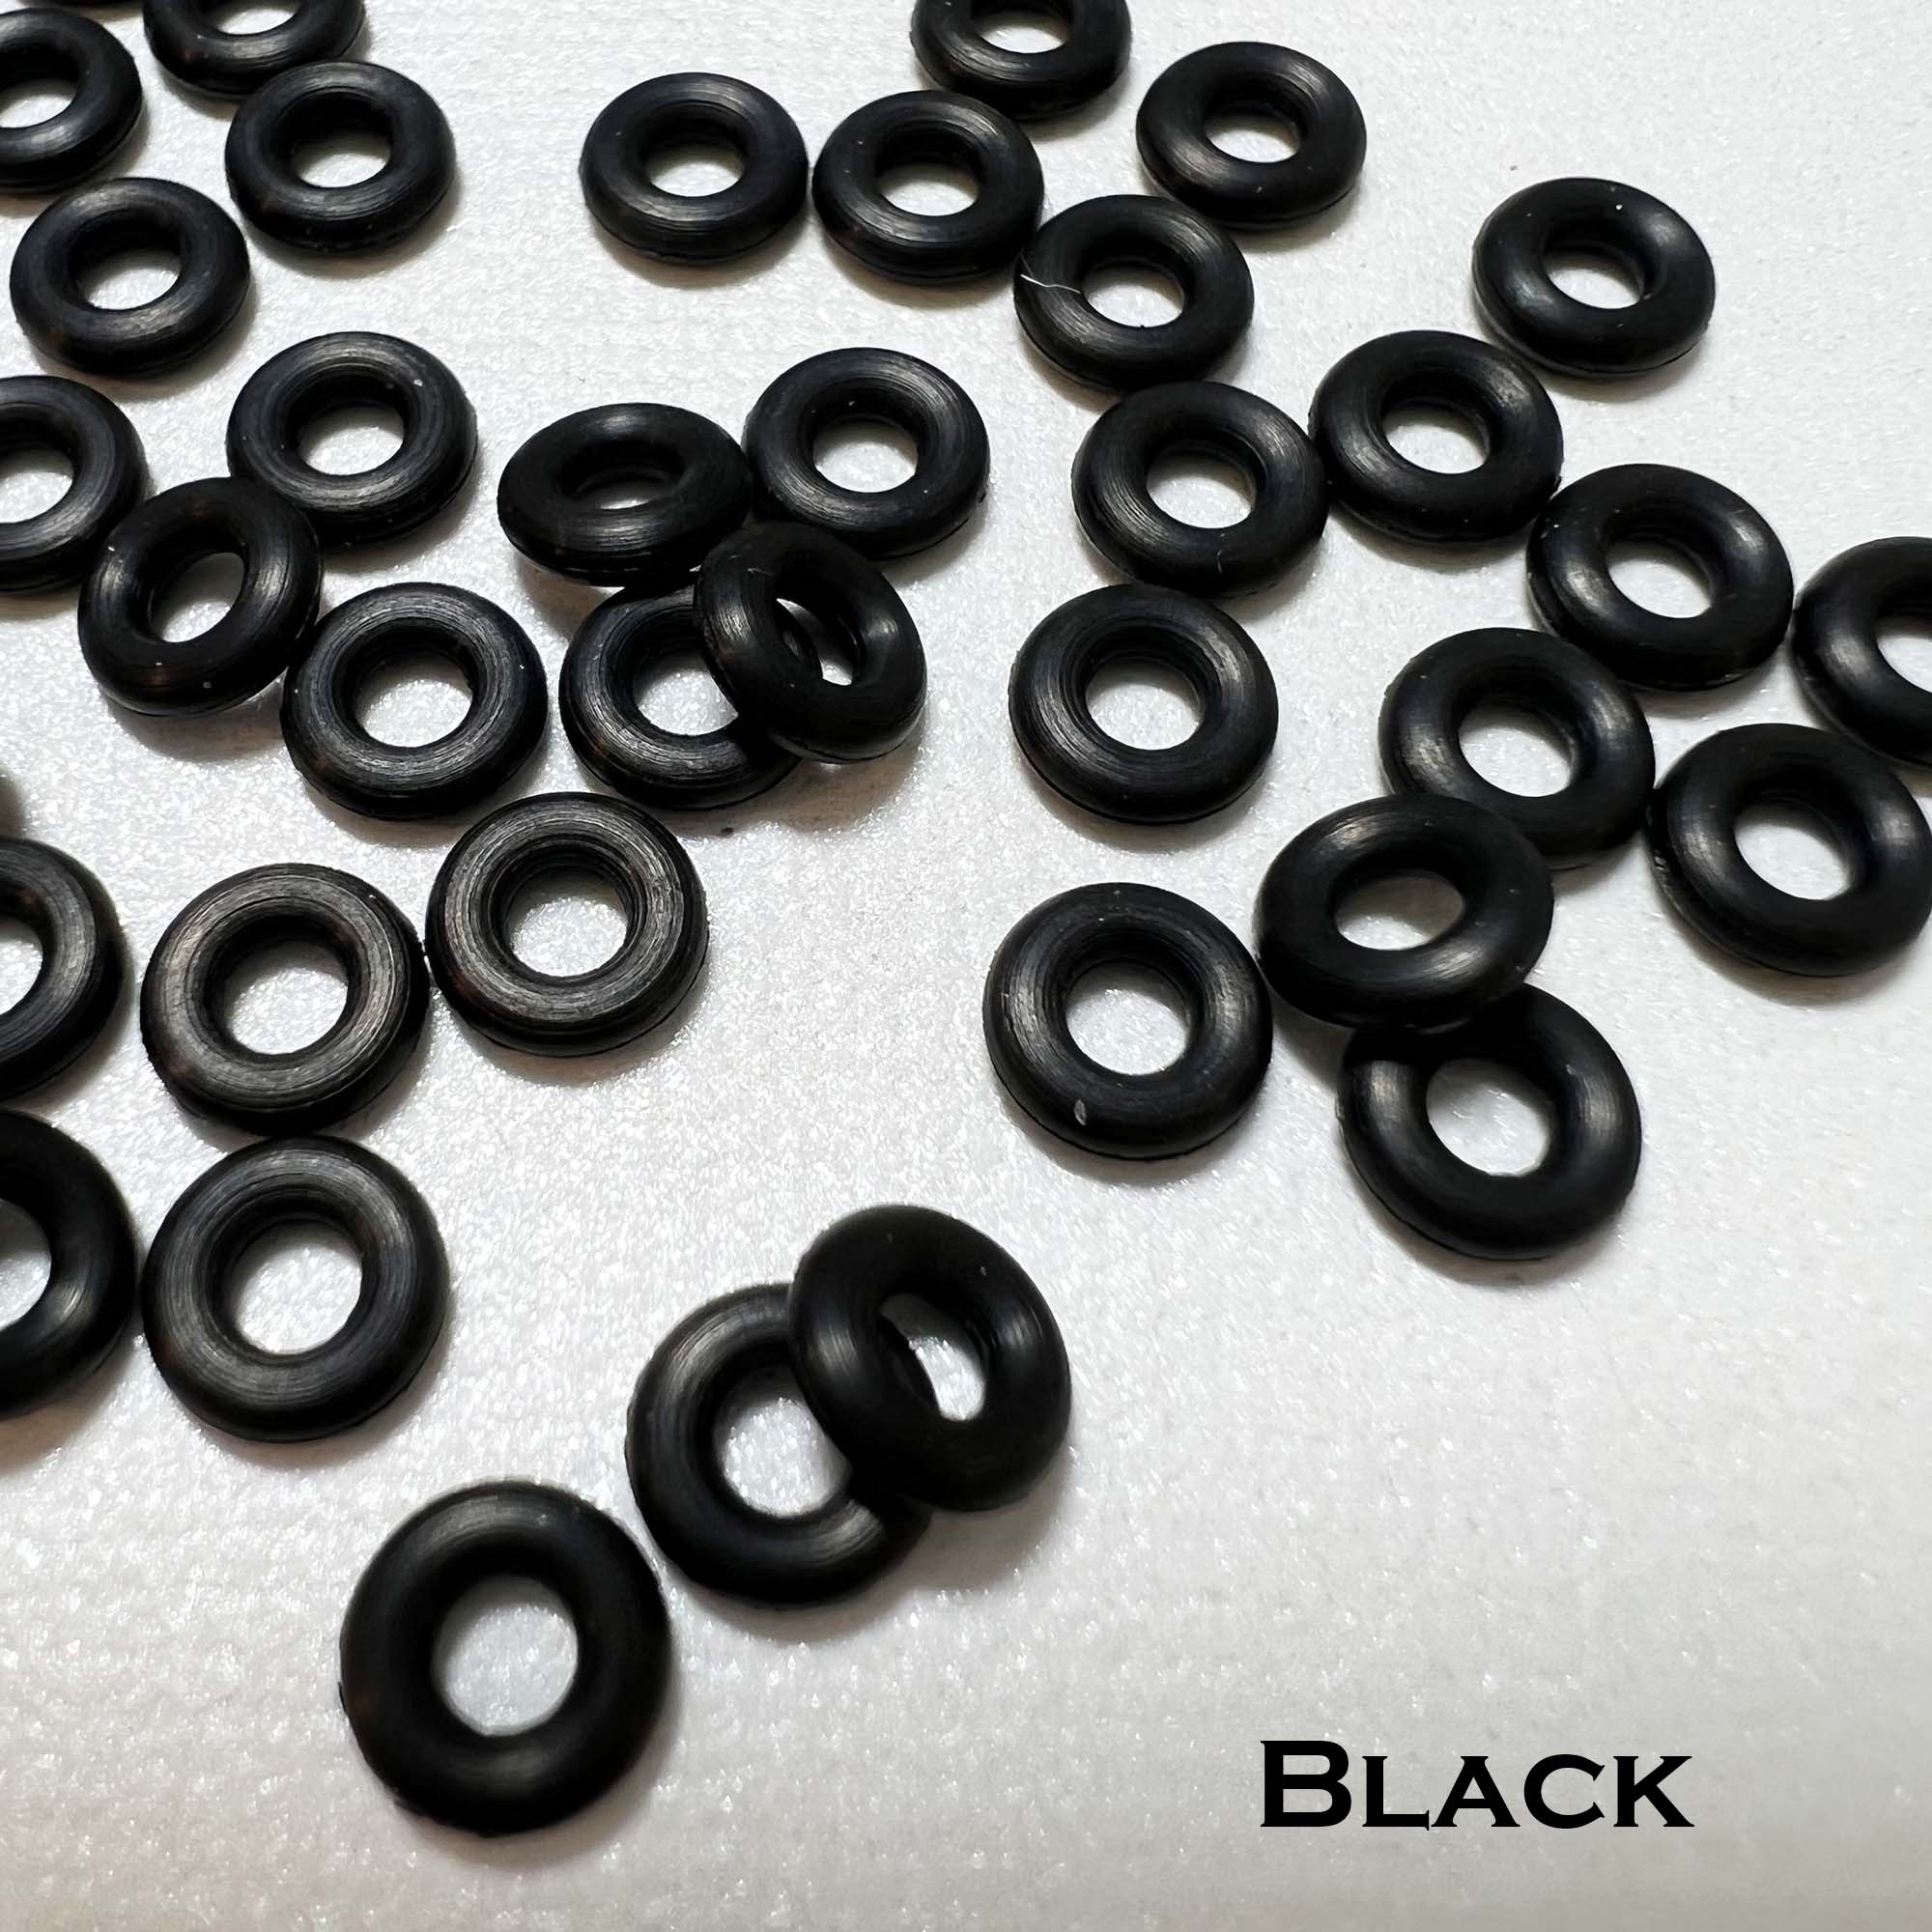 Fonkeling Promotie Ik geloof 6mm Rubber O-Rings (ID: 2.6mm) - choose color & quantity – Bead Me A Story